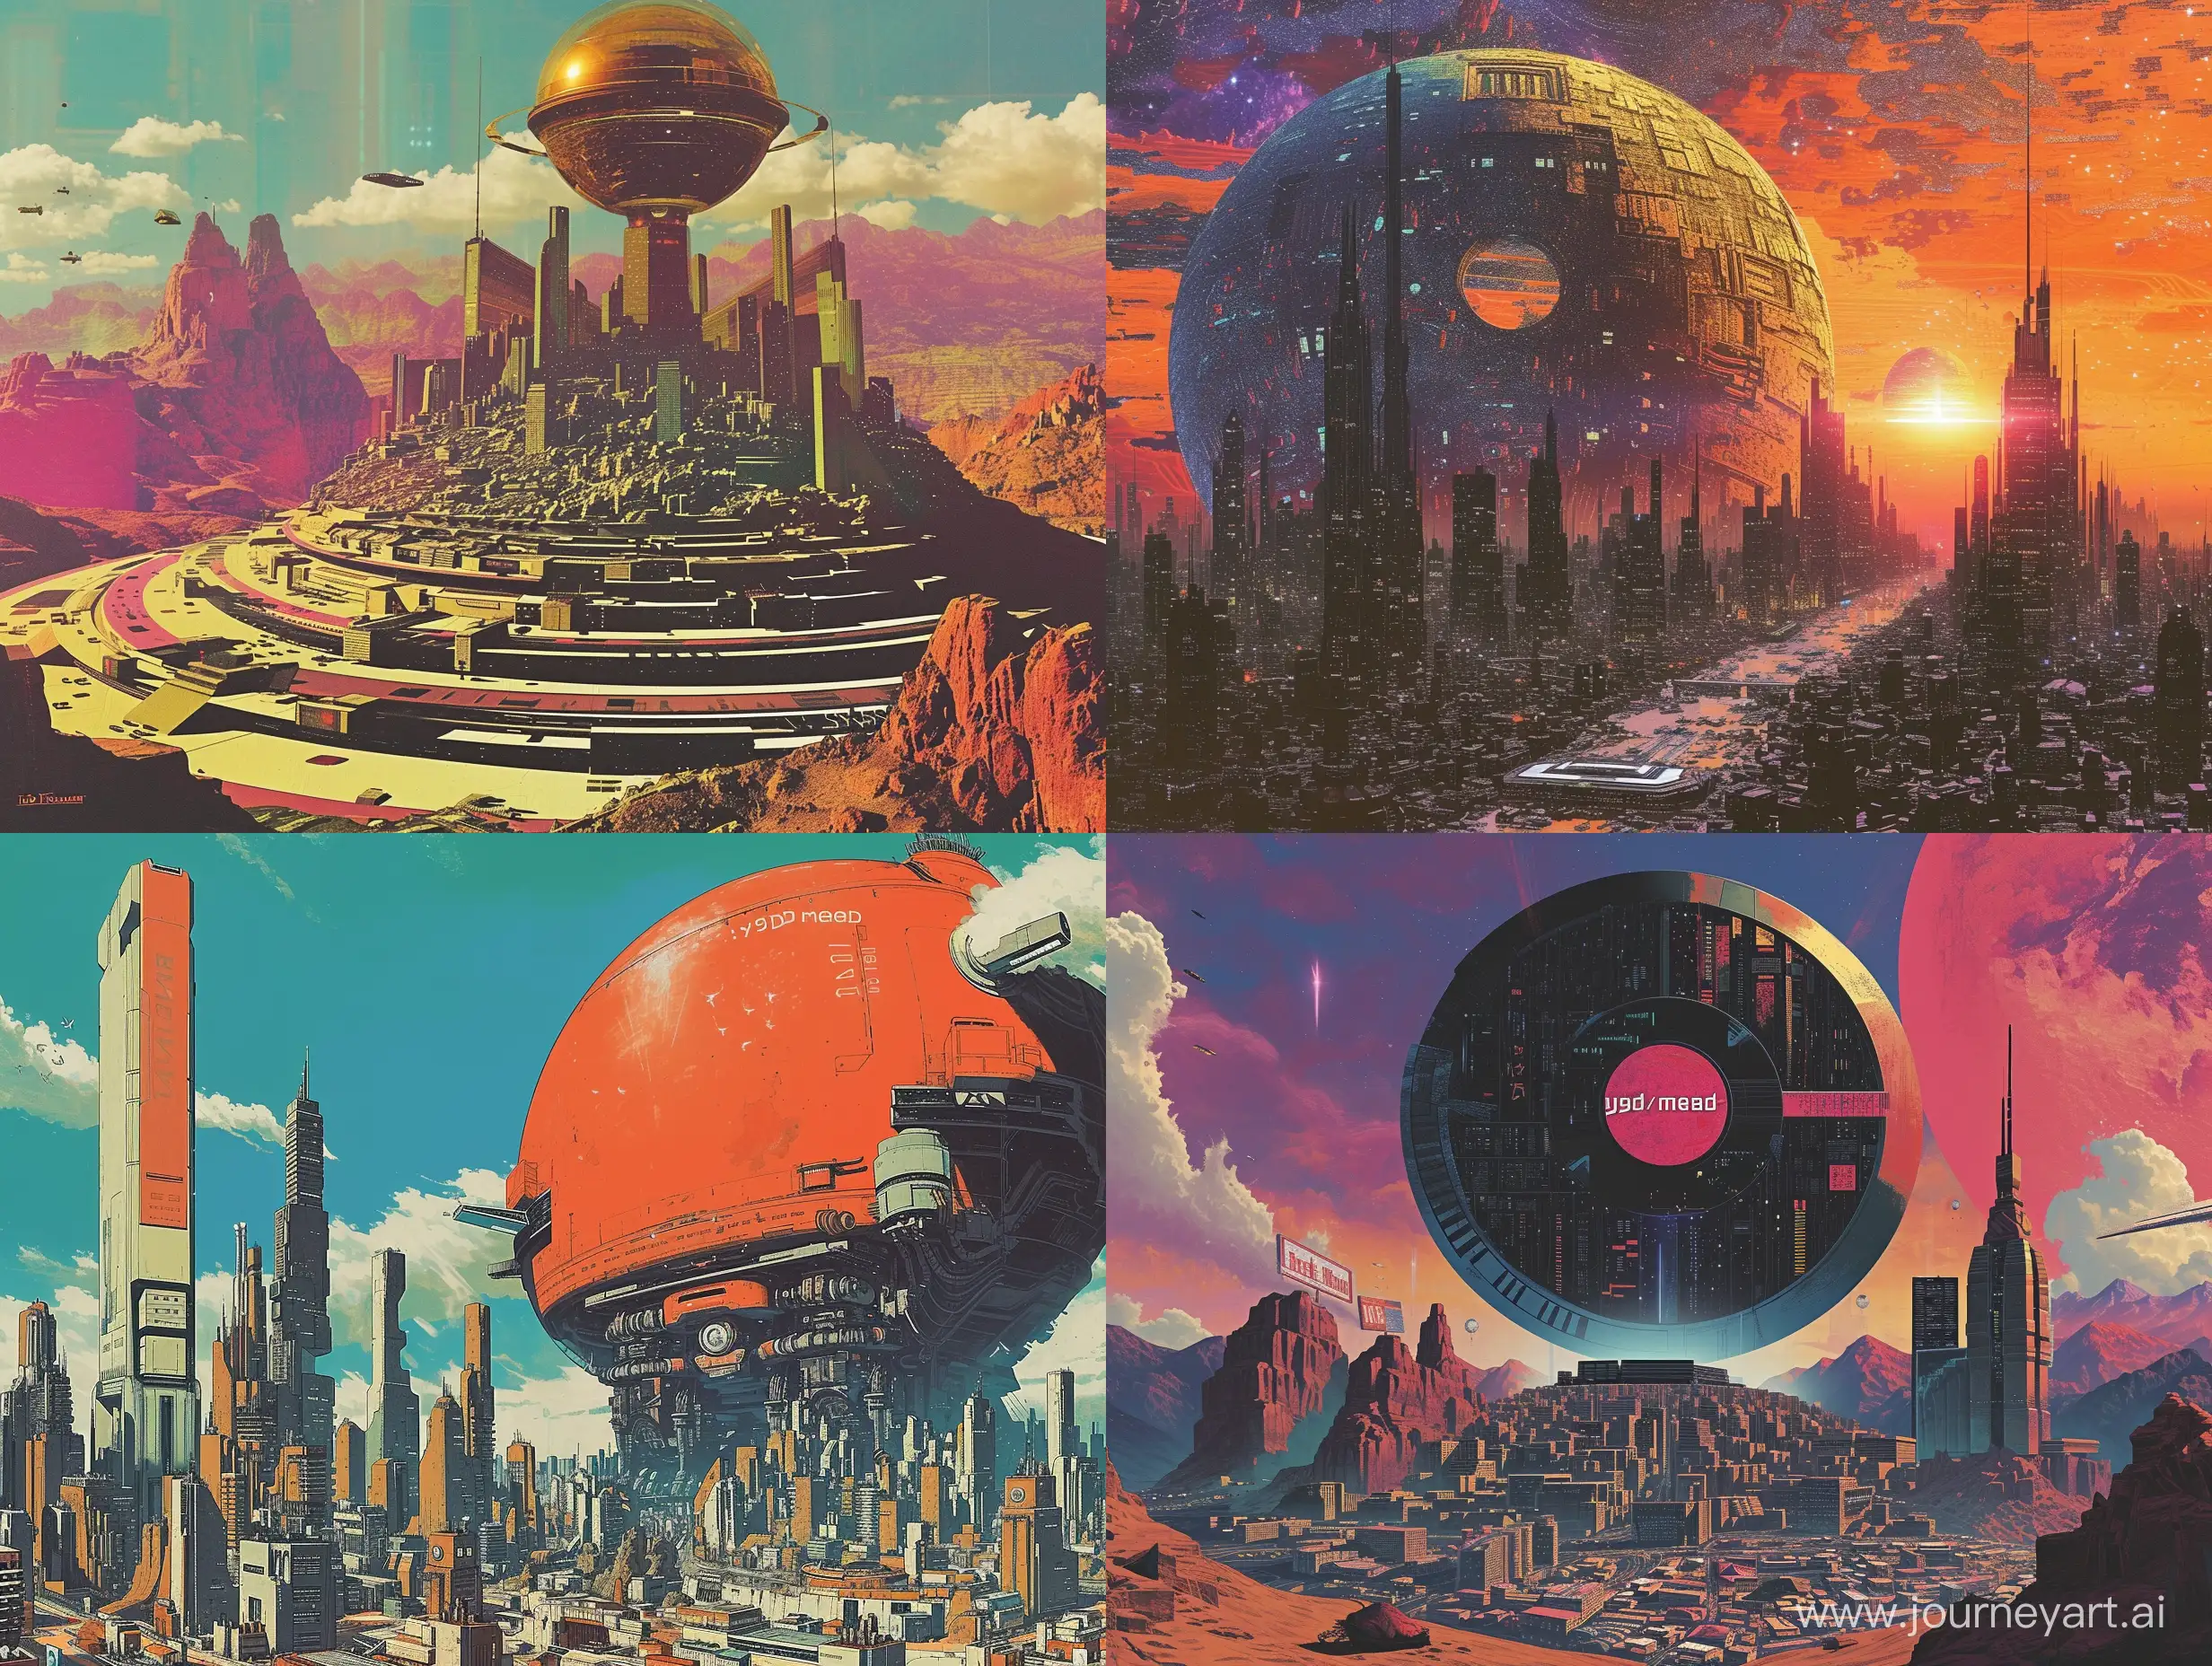 a city with a giant dvd, retro futurism poster artwork, futurism, artwork by Syd Mead, synthwave artwork poster, retro, 70s, 80s, vintage artwork poster, visual, aesthetic, surrealism, fantasy art work poster, artwork by Hiroshi Nagaim , vintage poster, nostalgic, nostalgic colors, illustration, exploration, artwork by Robert McCall